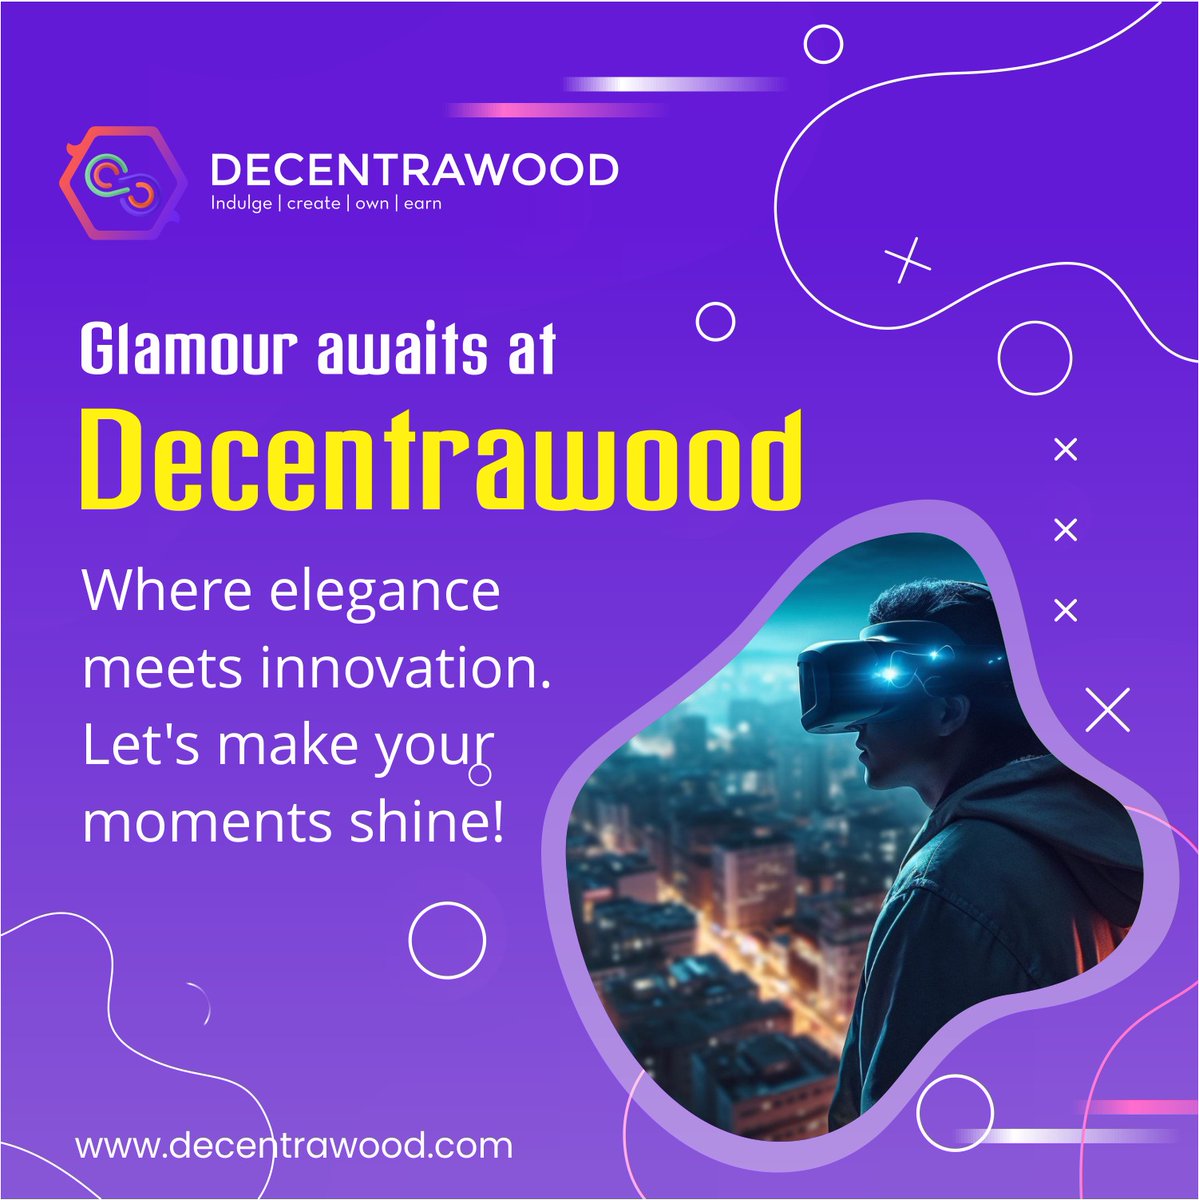 pic Adventures at @decentrawood #games :  Where Heroes Rise and Legends Reign!  

decentrawood.com 

#gaming #oculus #vrgame #vrgames #oculusquest #htcvive #oculusrift #videogames #virtualrealitygames #games #playstation